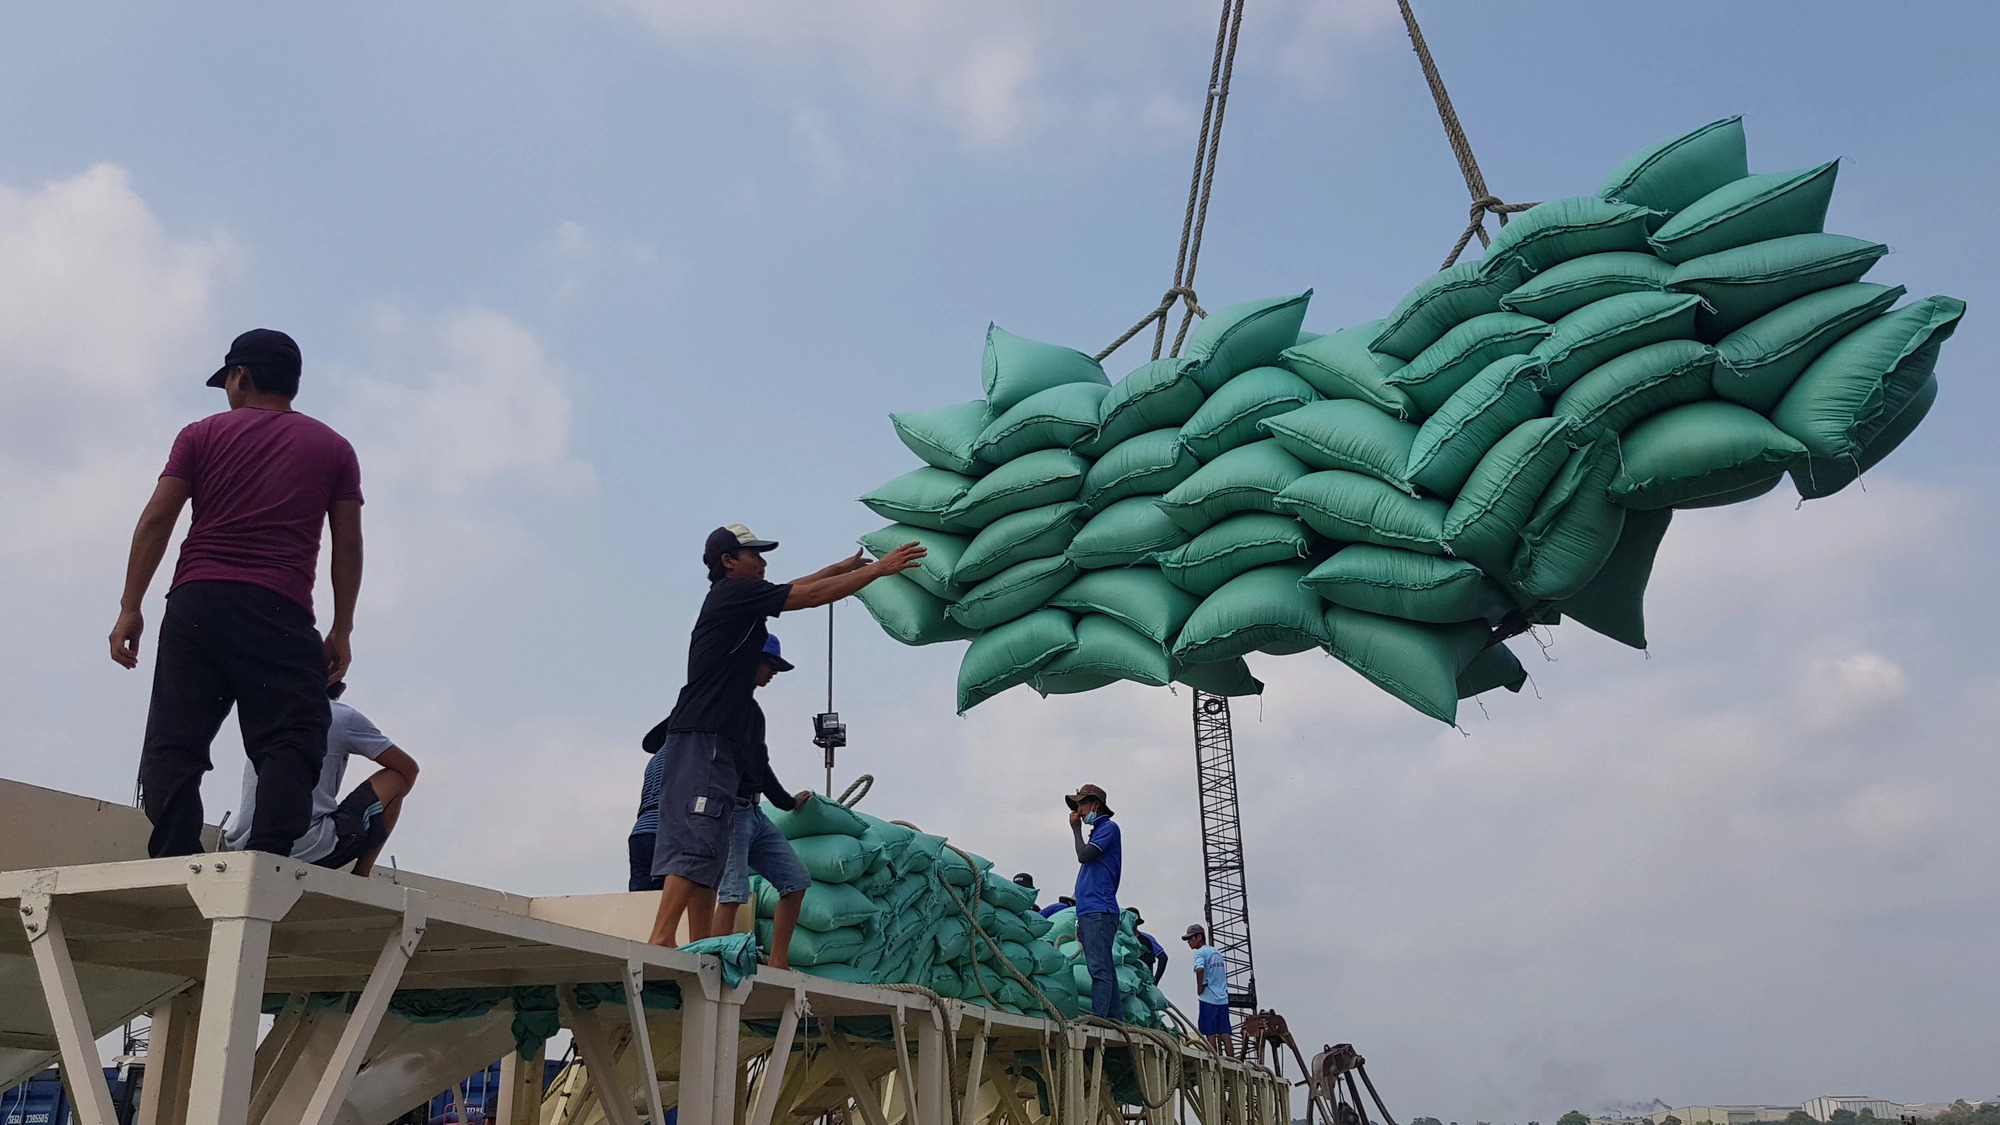 Workers load up shipping containers with bags of rice for export at My Thoi Port, Long Xuyen City, An Giang Province, southern Vietnam. Photo: Buu Dau / Tuoi Tre